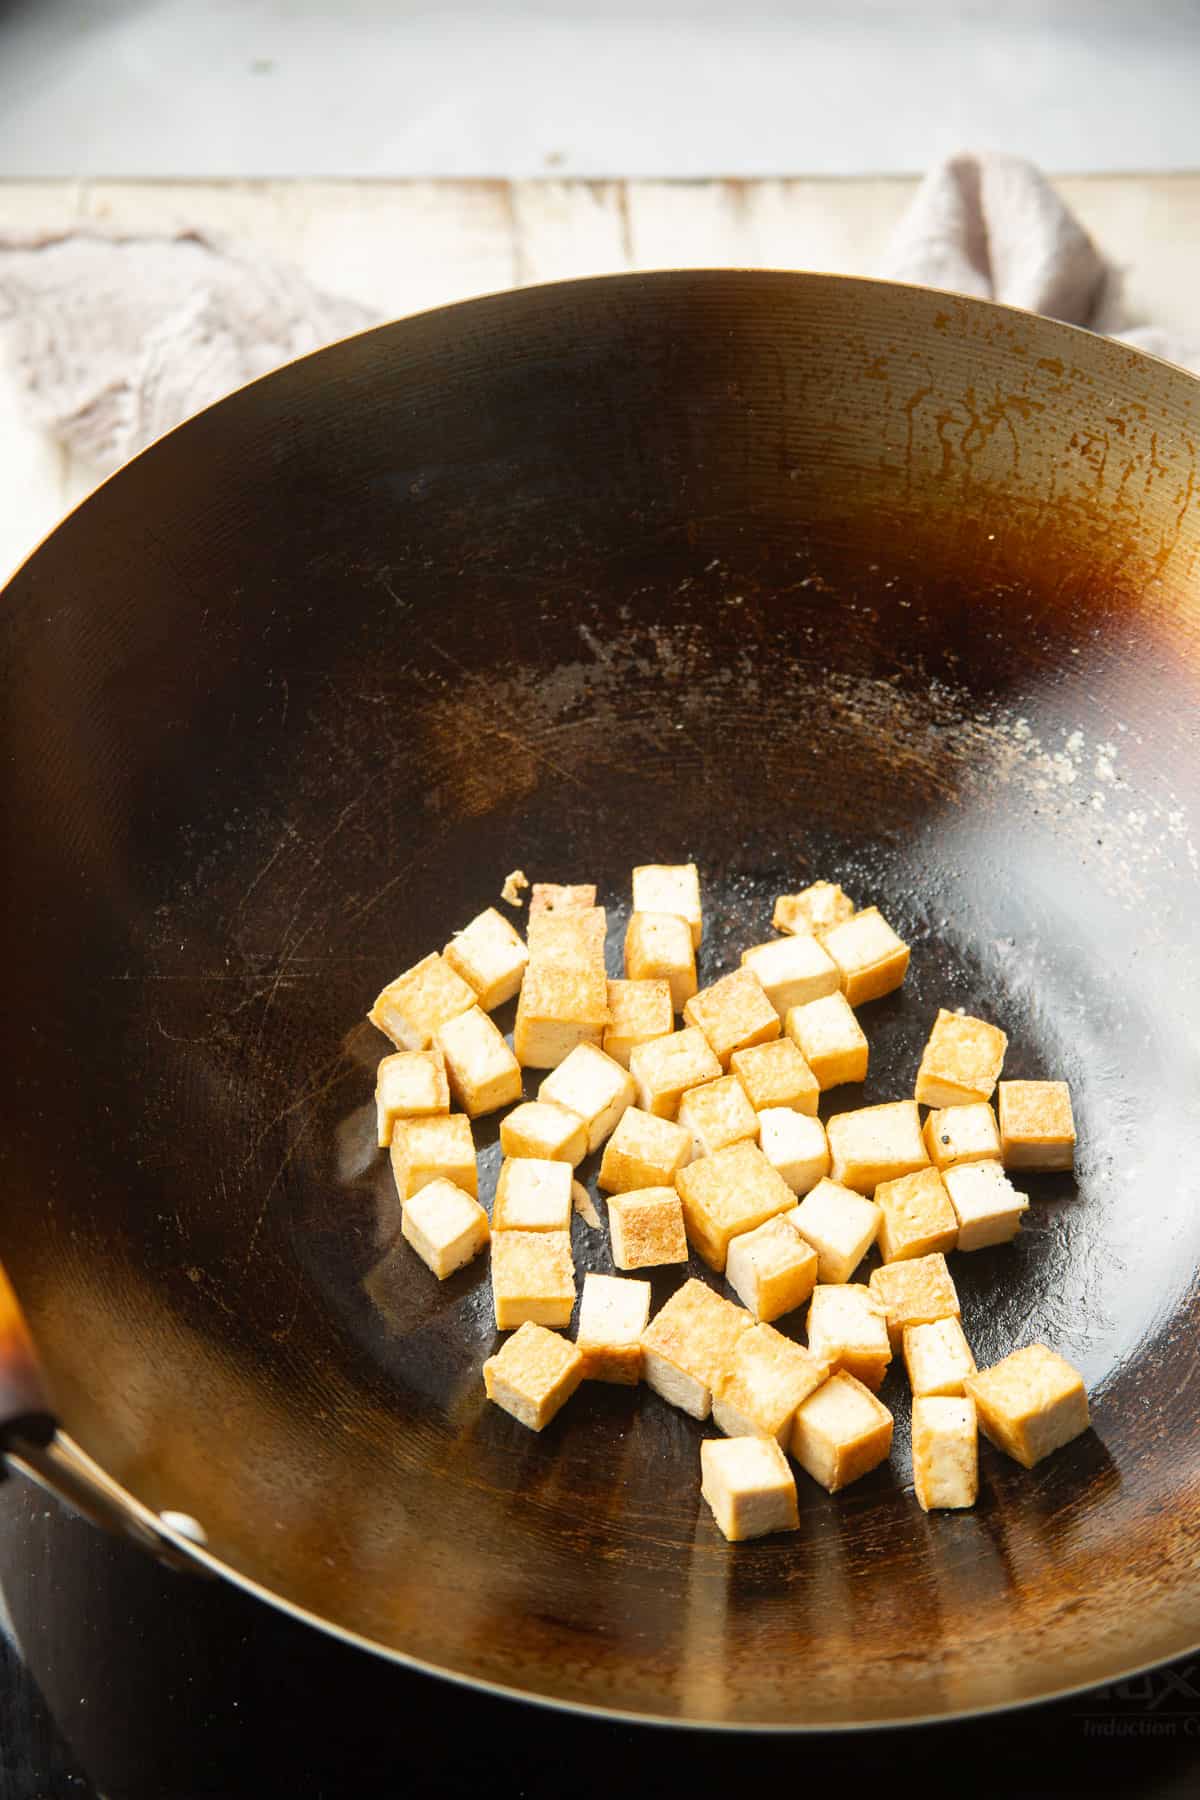 Tofu cubes cooking in a wok.